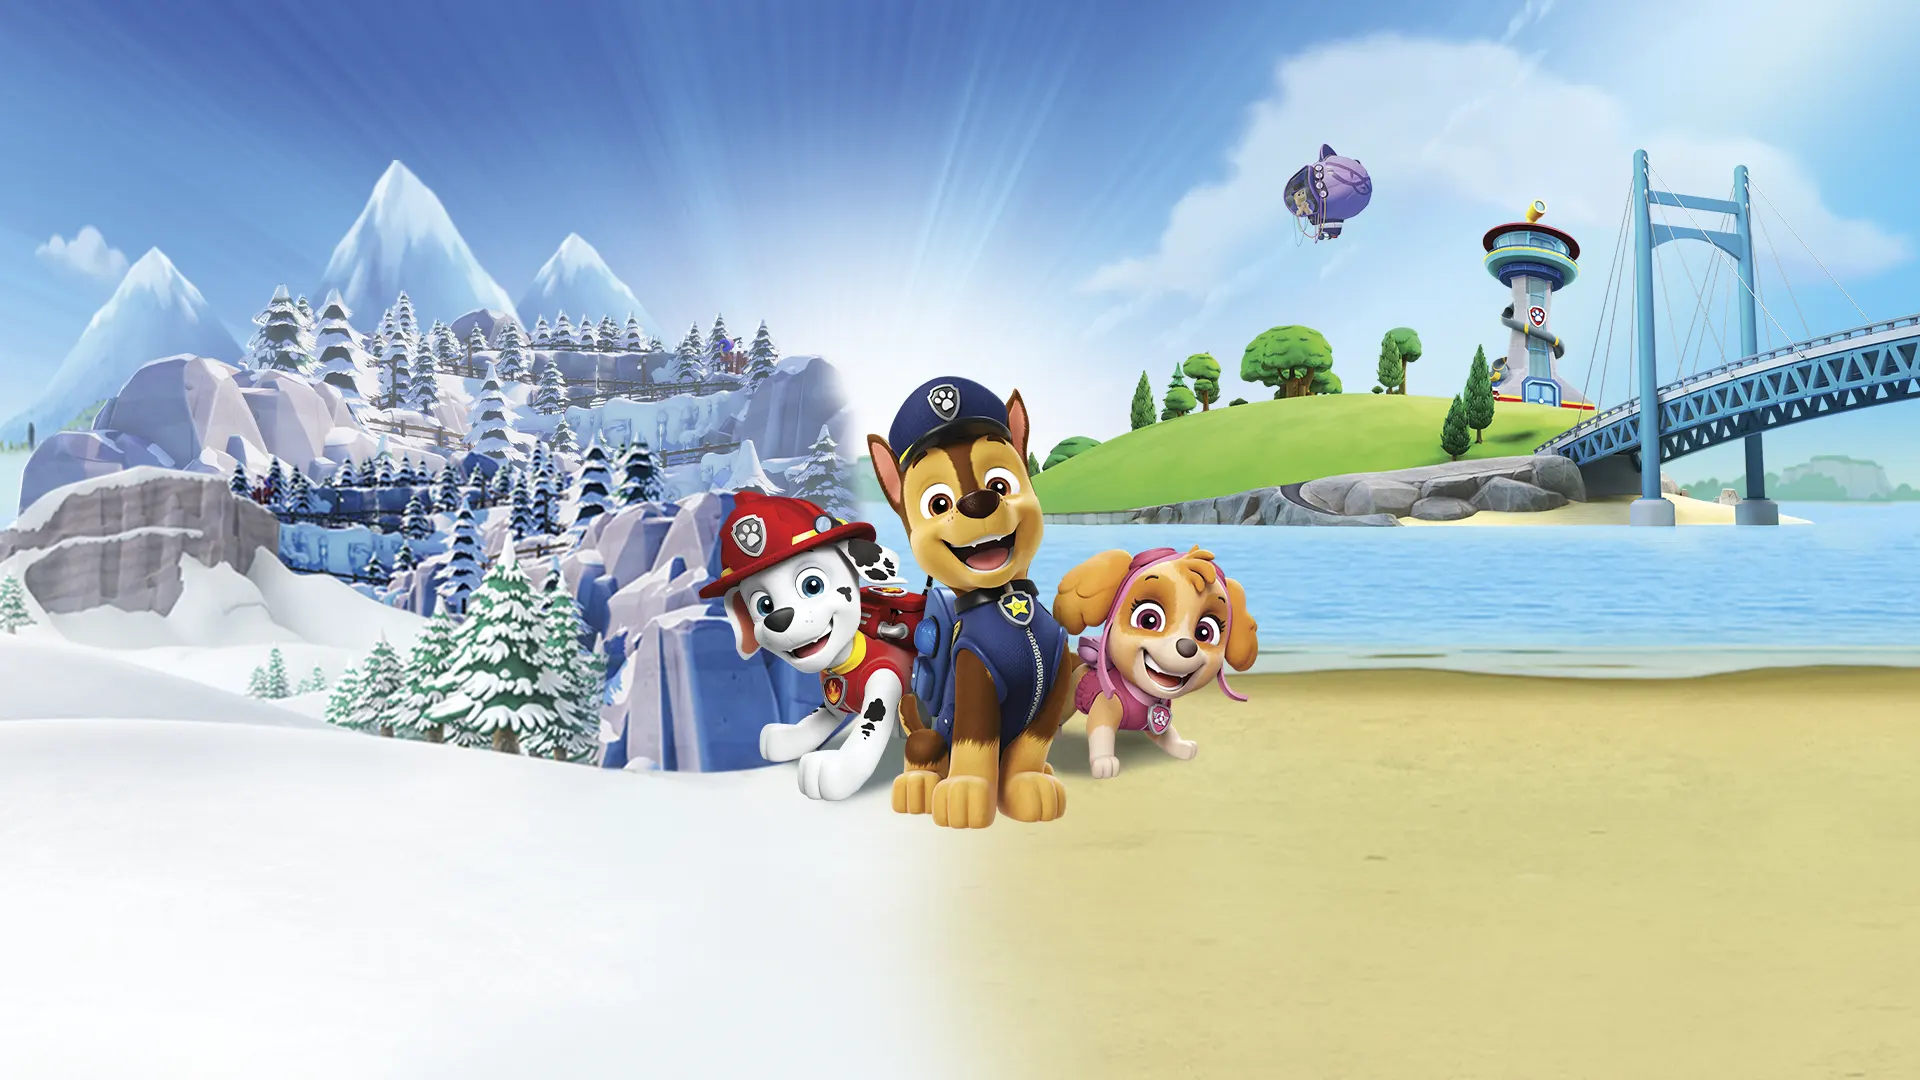 PAW Patrol World - The Videogame - Outright Games